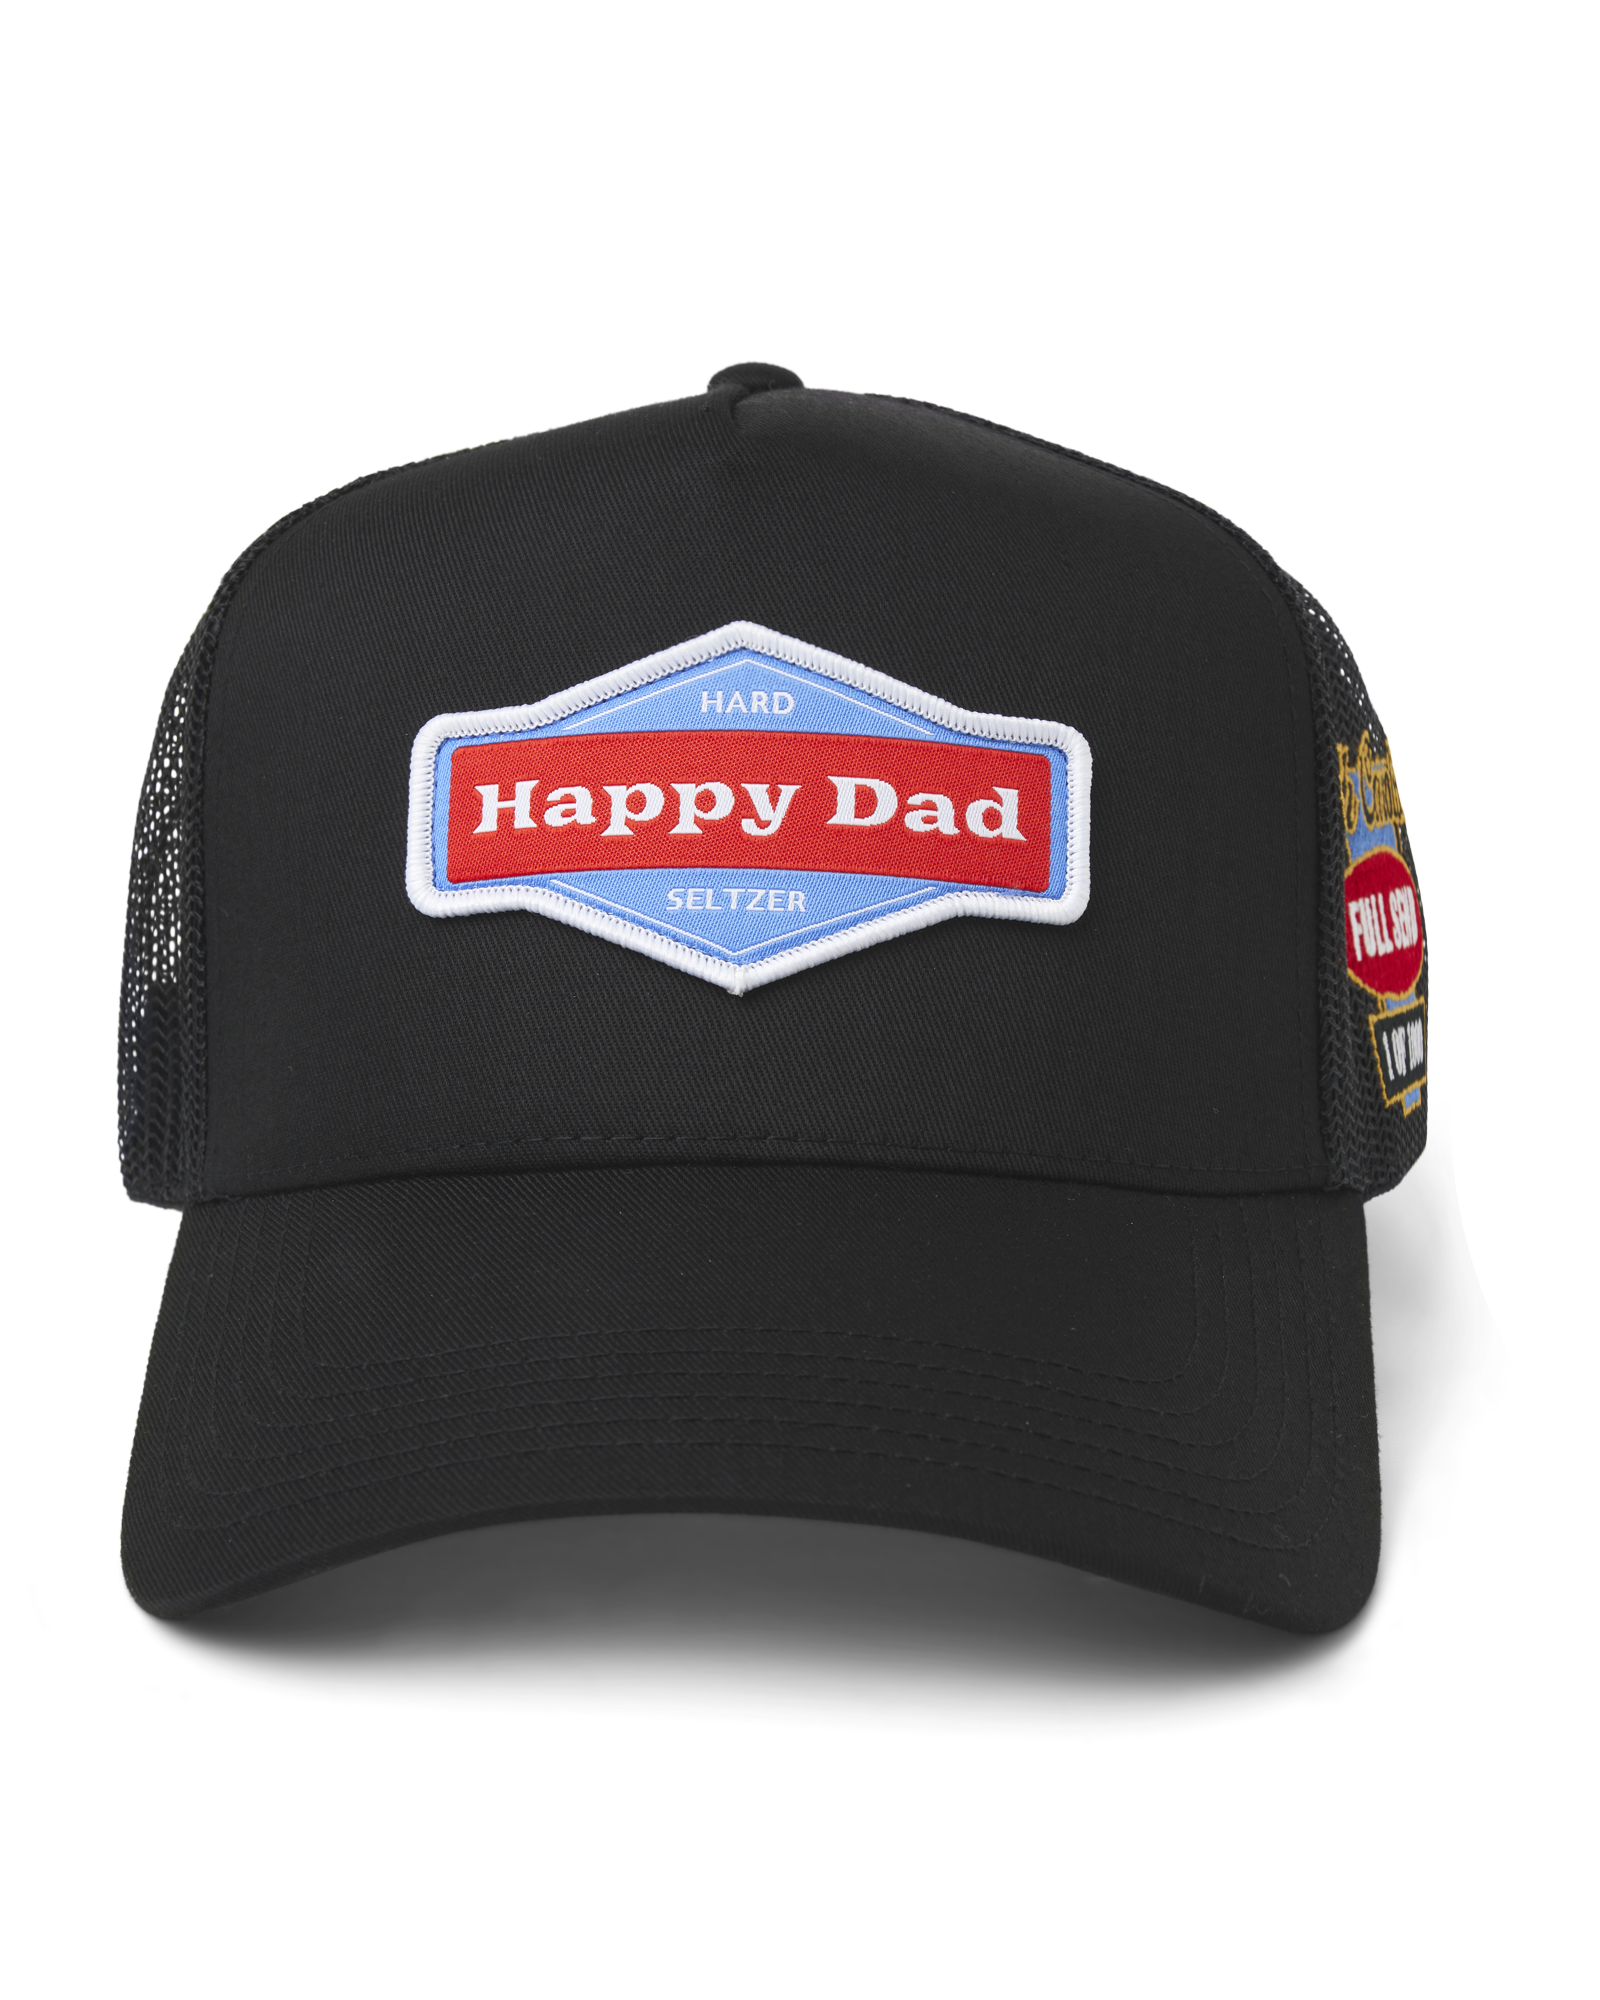 (Limited) New Jersey - Happy Dad State Trucker Hat 1 of 1000